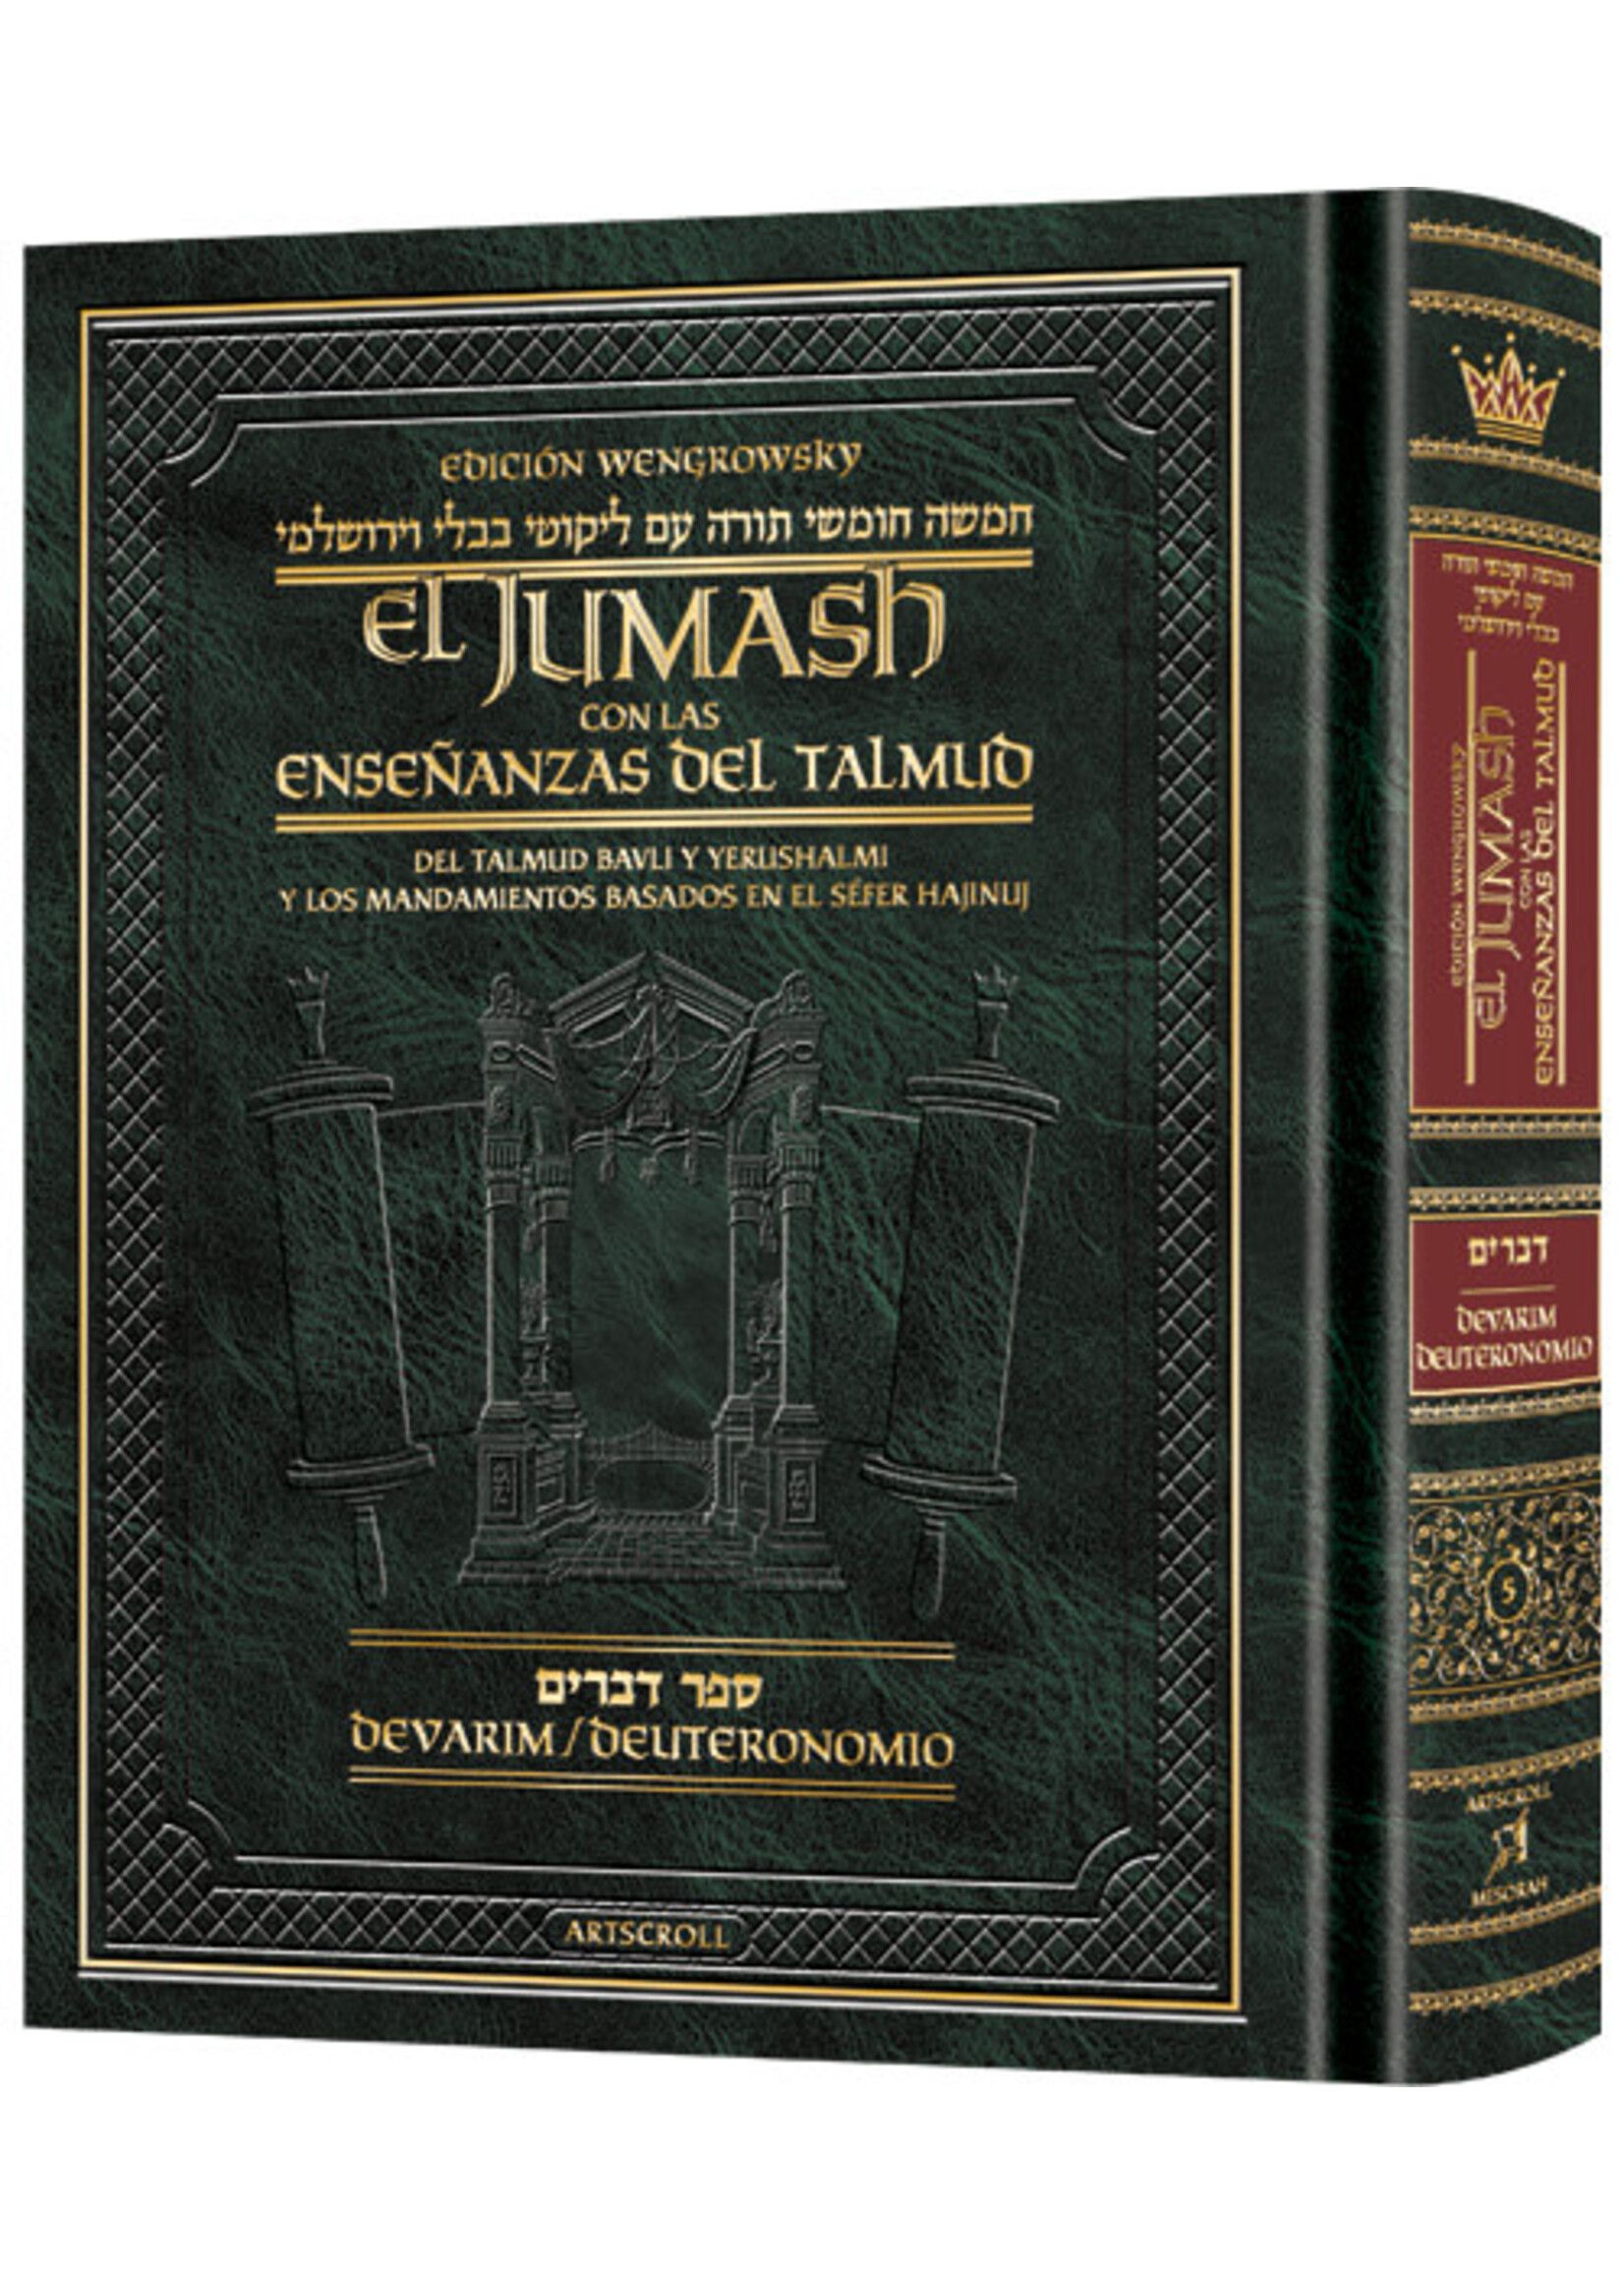 WENGROWSKY SPANISH EDITION OF CHUMASH WITH TEACHINGS OF TALMUD